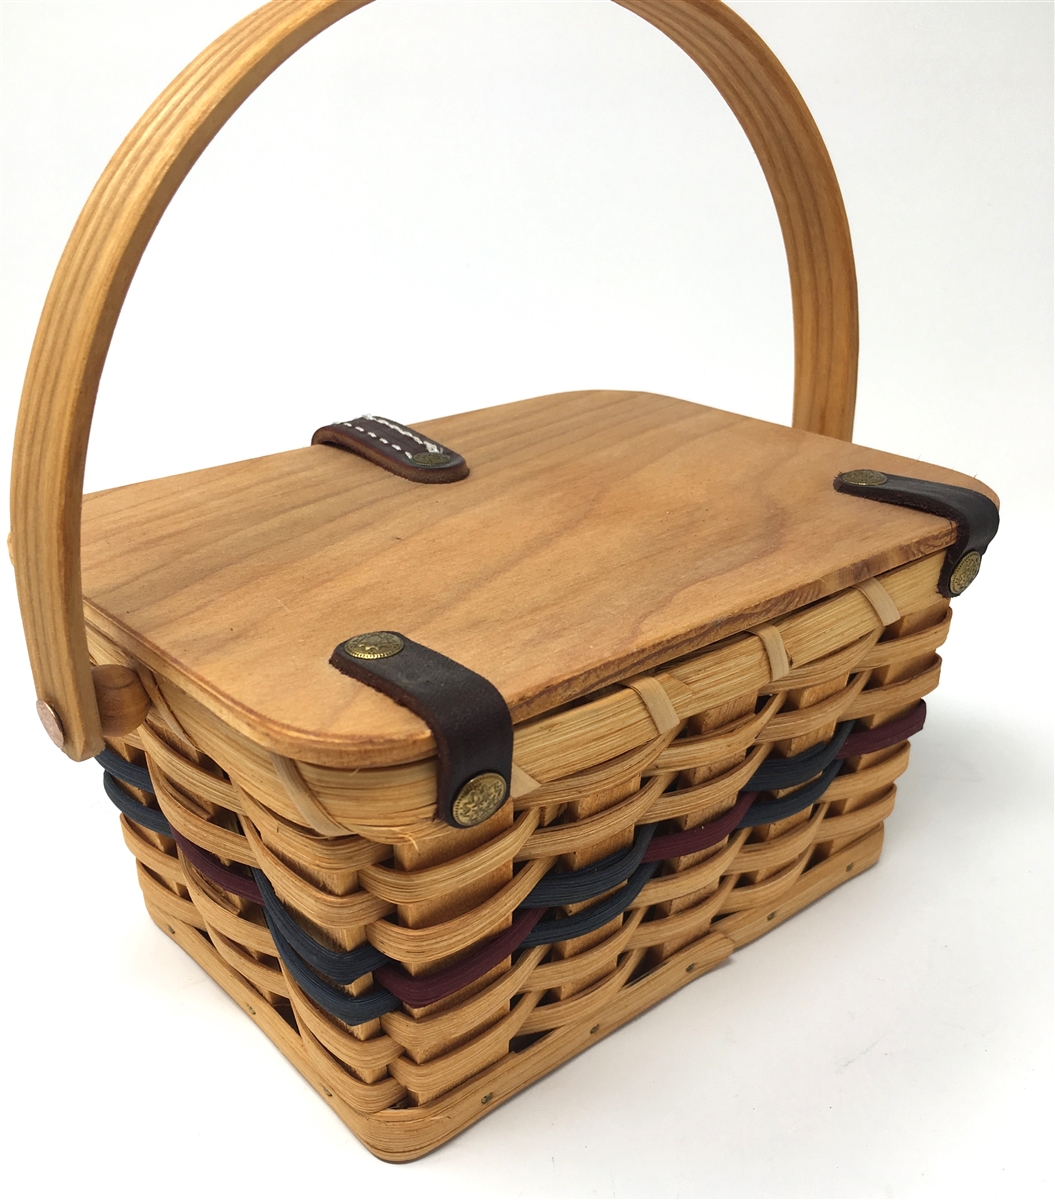 Amish handmade and perfectly constructed. Features a beautifully stained  lid with a snap to hold the purse close. This basket is made by Sam & Emma  who are from Swartzenberger Baskets with